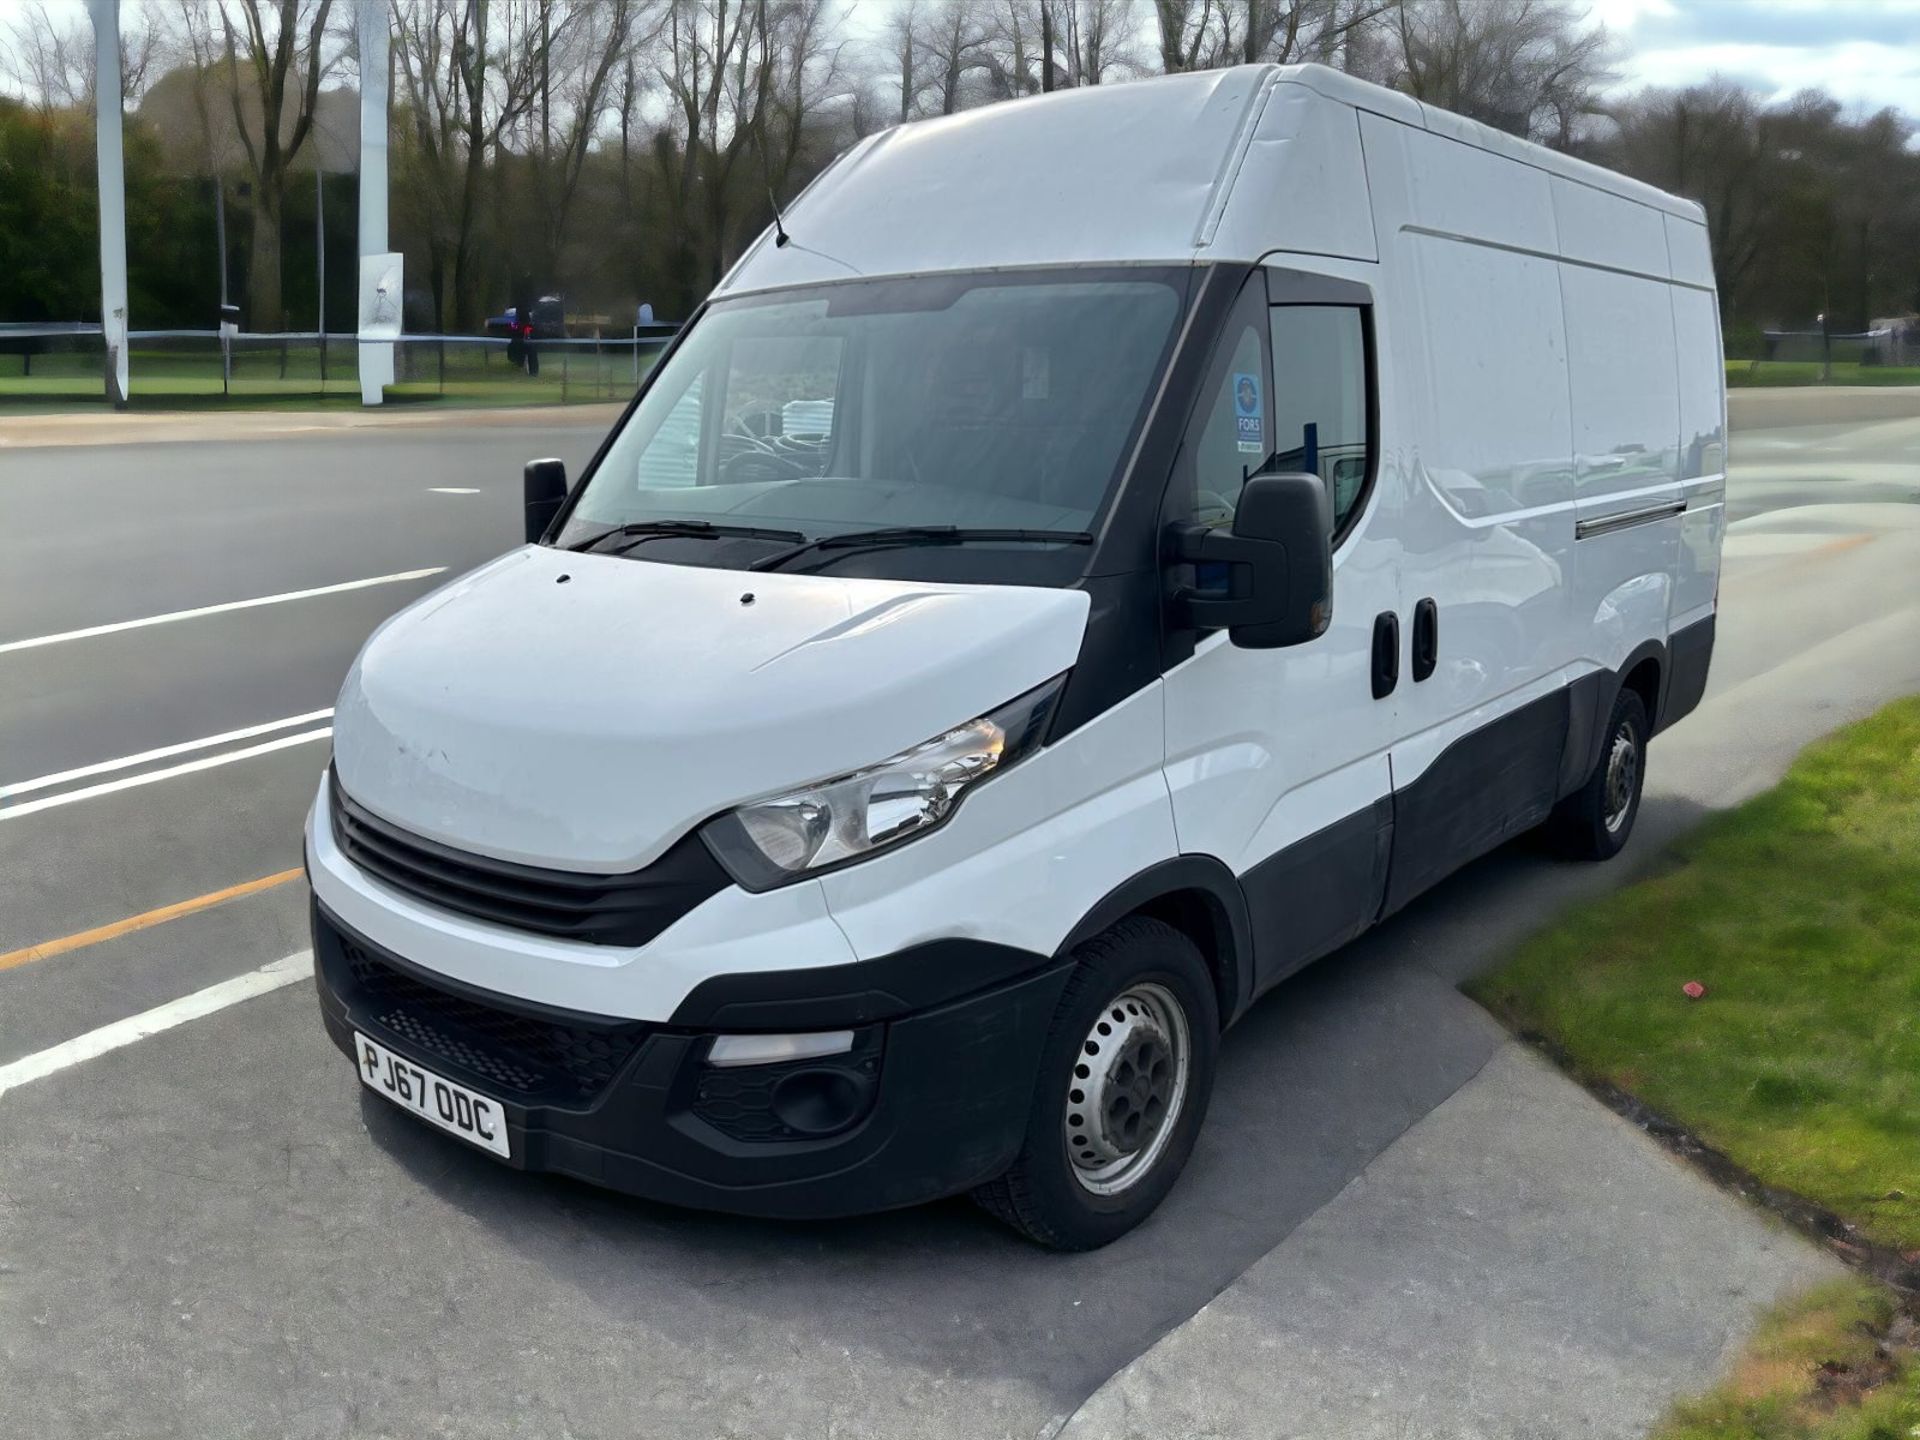 2017-67 REG IVECO DAILY 35S -HPI CLEAR - READY FOR WORK! - Bild 2 aus 12